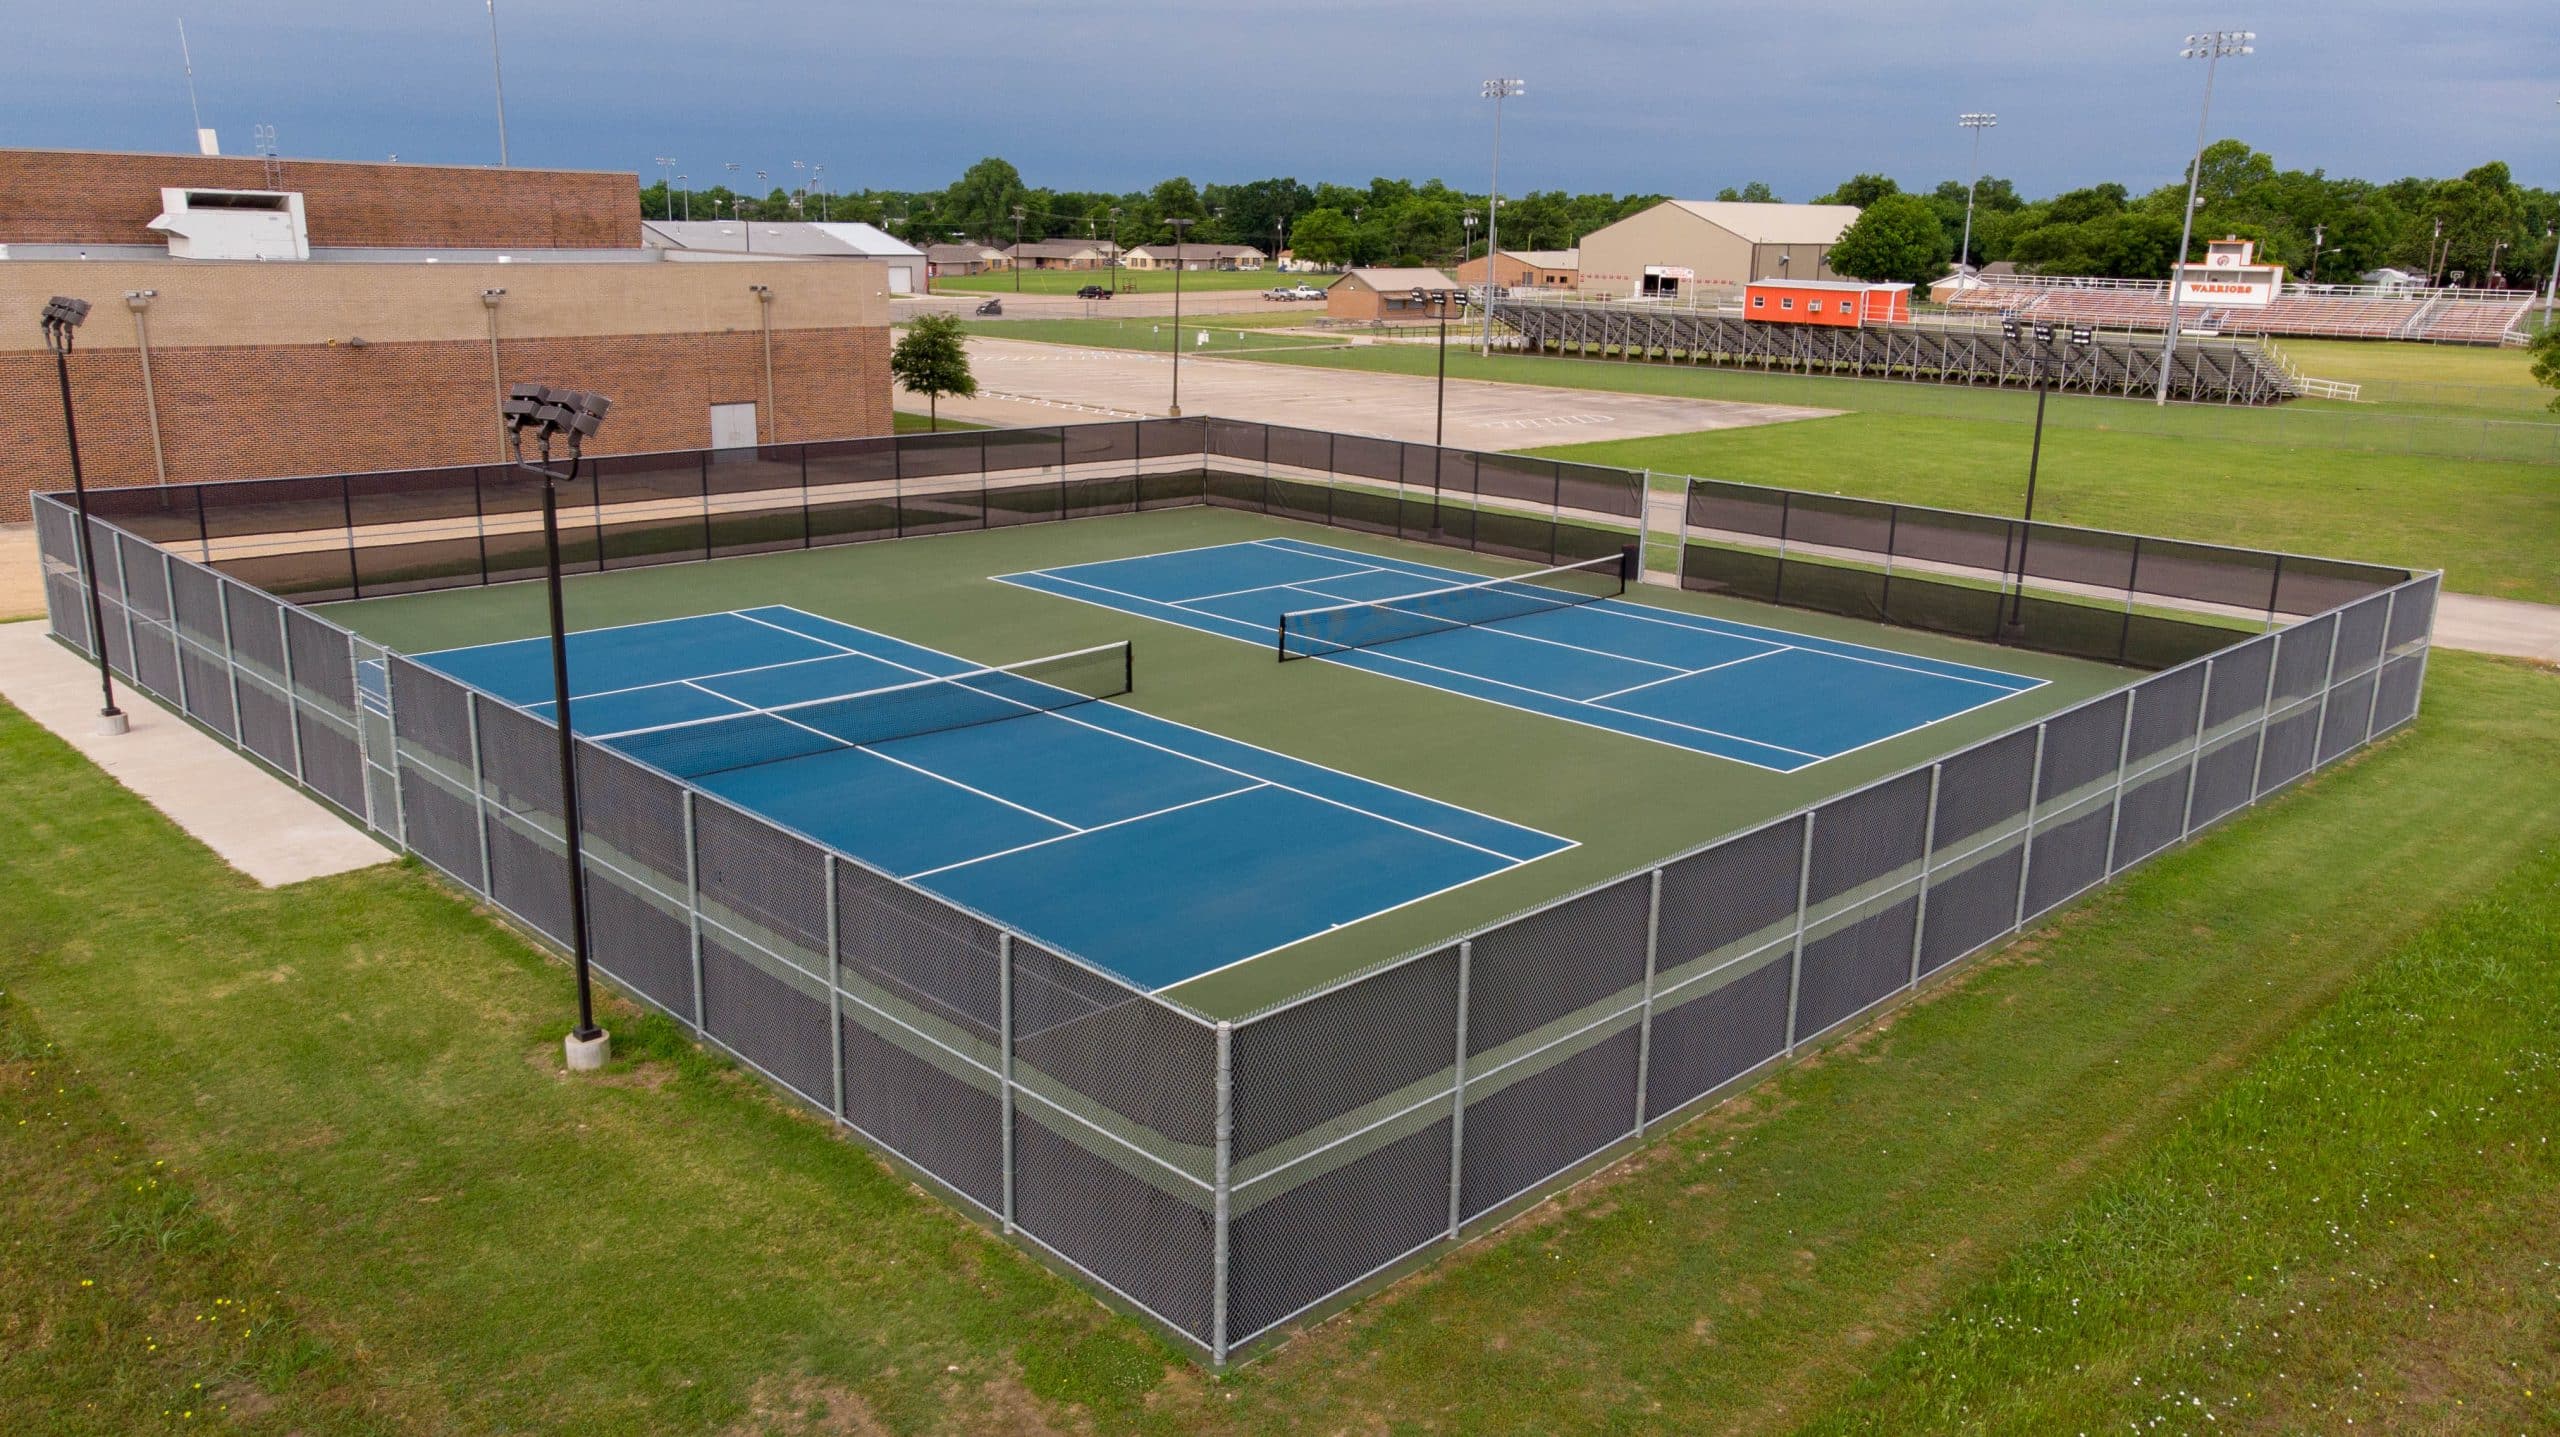 2 tennis courts Honey Grove TX completed by Archer Construction & Design